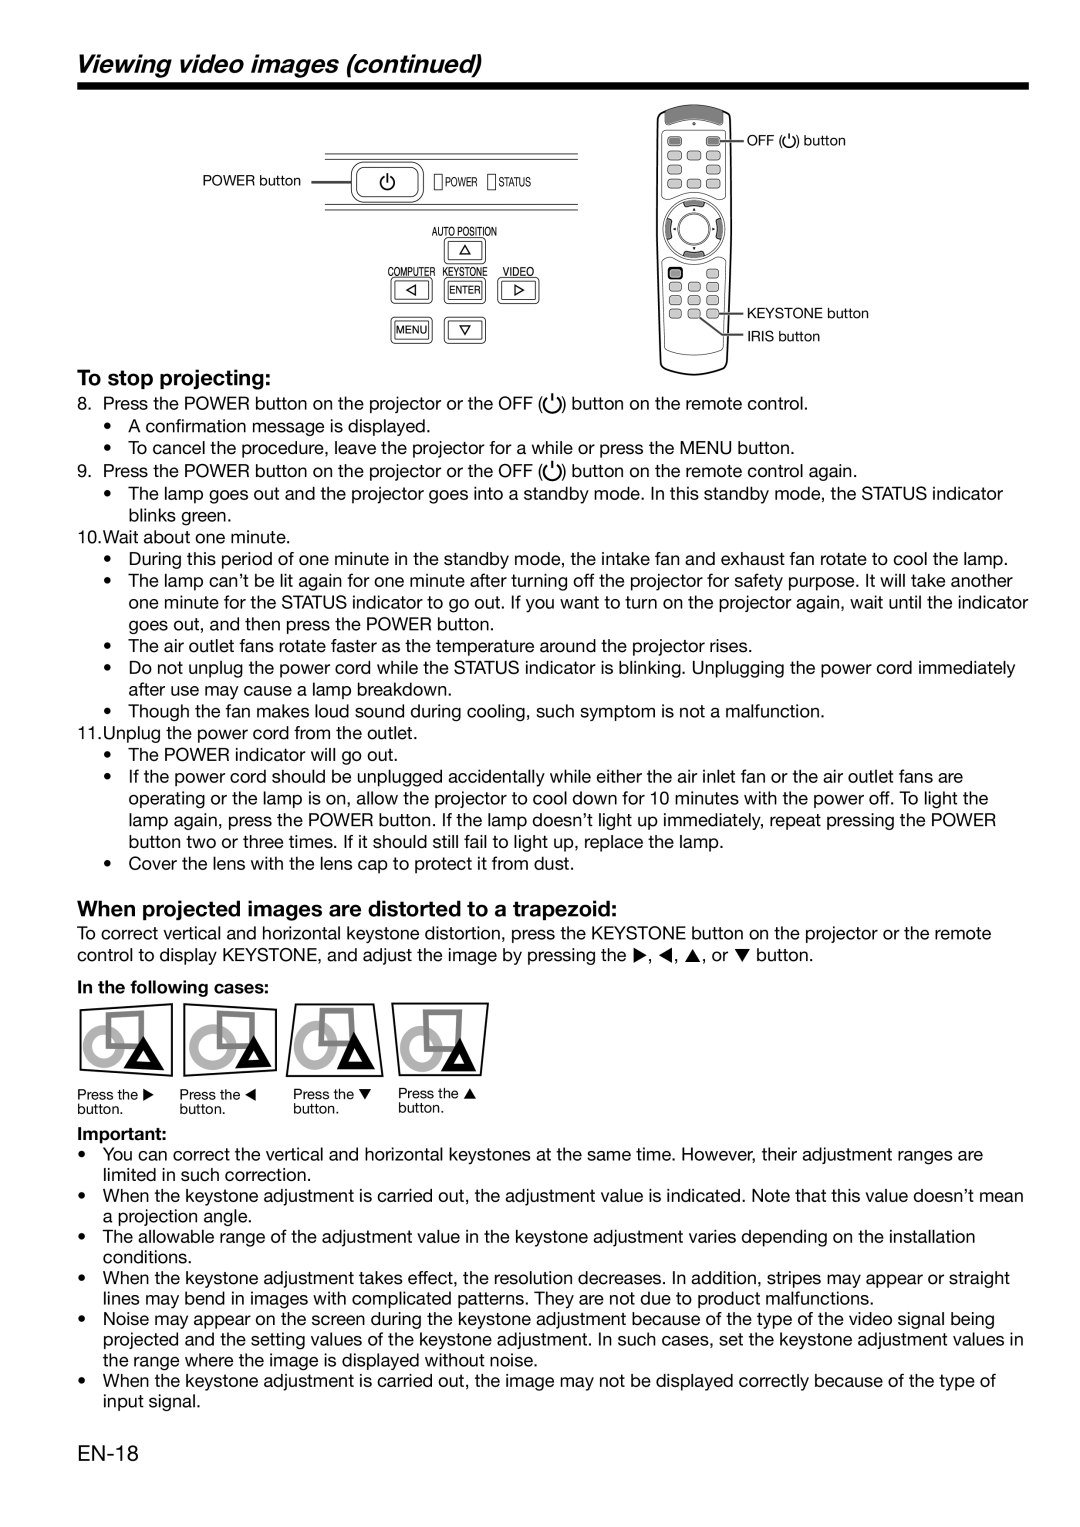 Mitsubishi Electronics HC3100 user manual To stop projecting, When projected images are distorted to a trapezoid, EN-18 